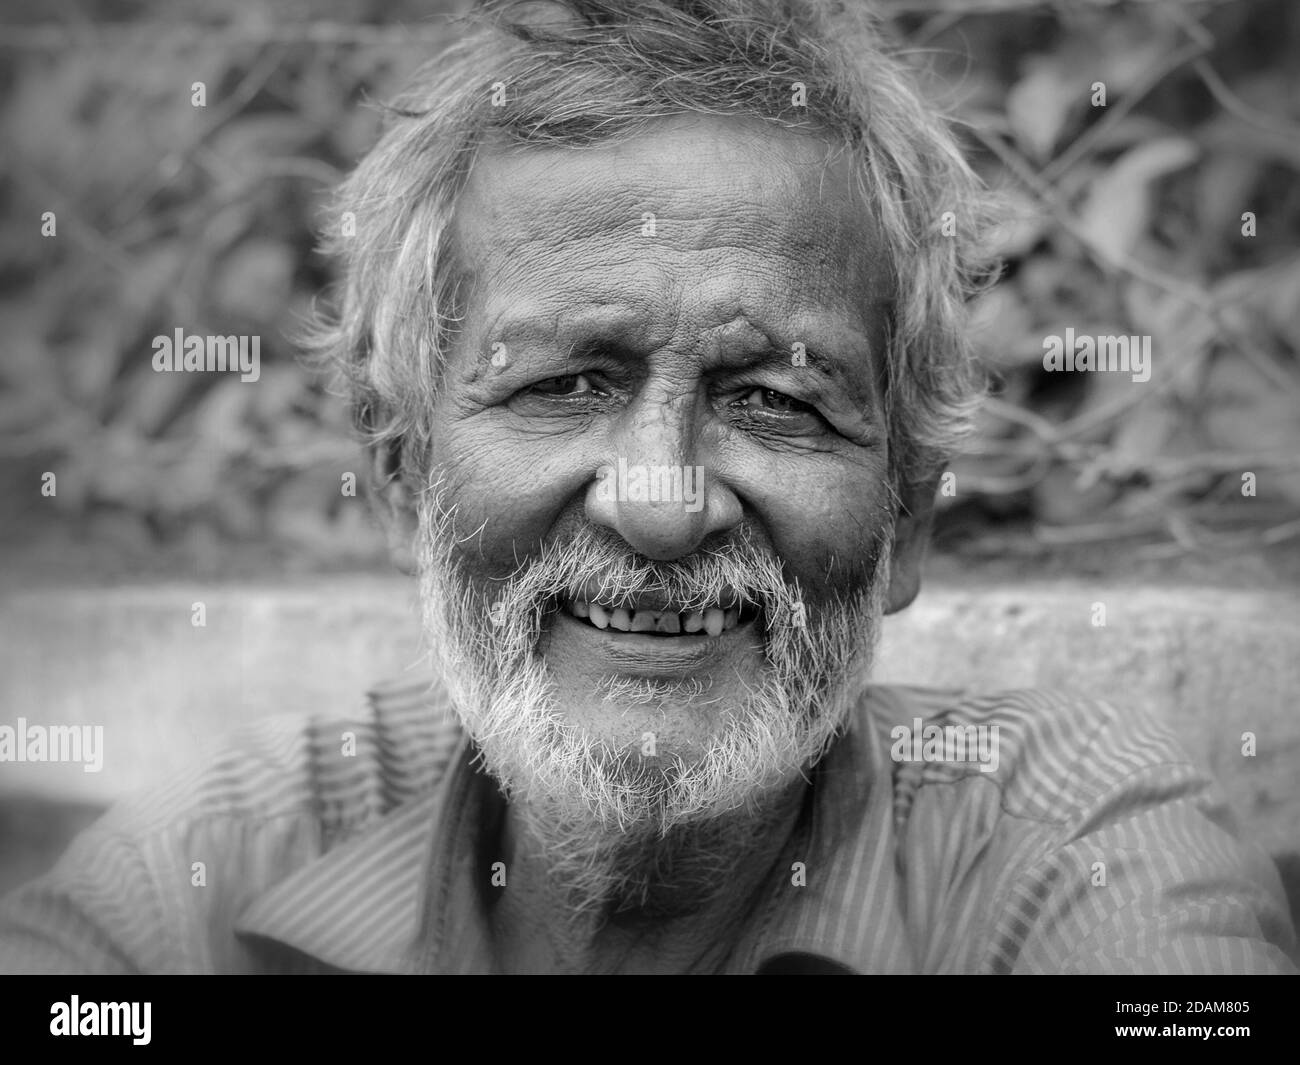 Elderly Indian migrant labourer with short beard sits by the roadside, waits for a daily job and smiles for the camera. Stock Photo